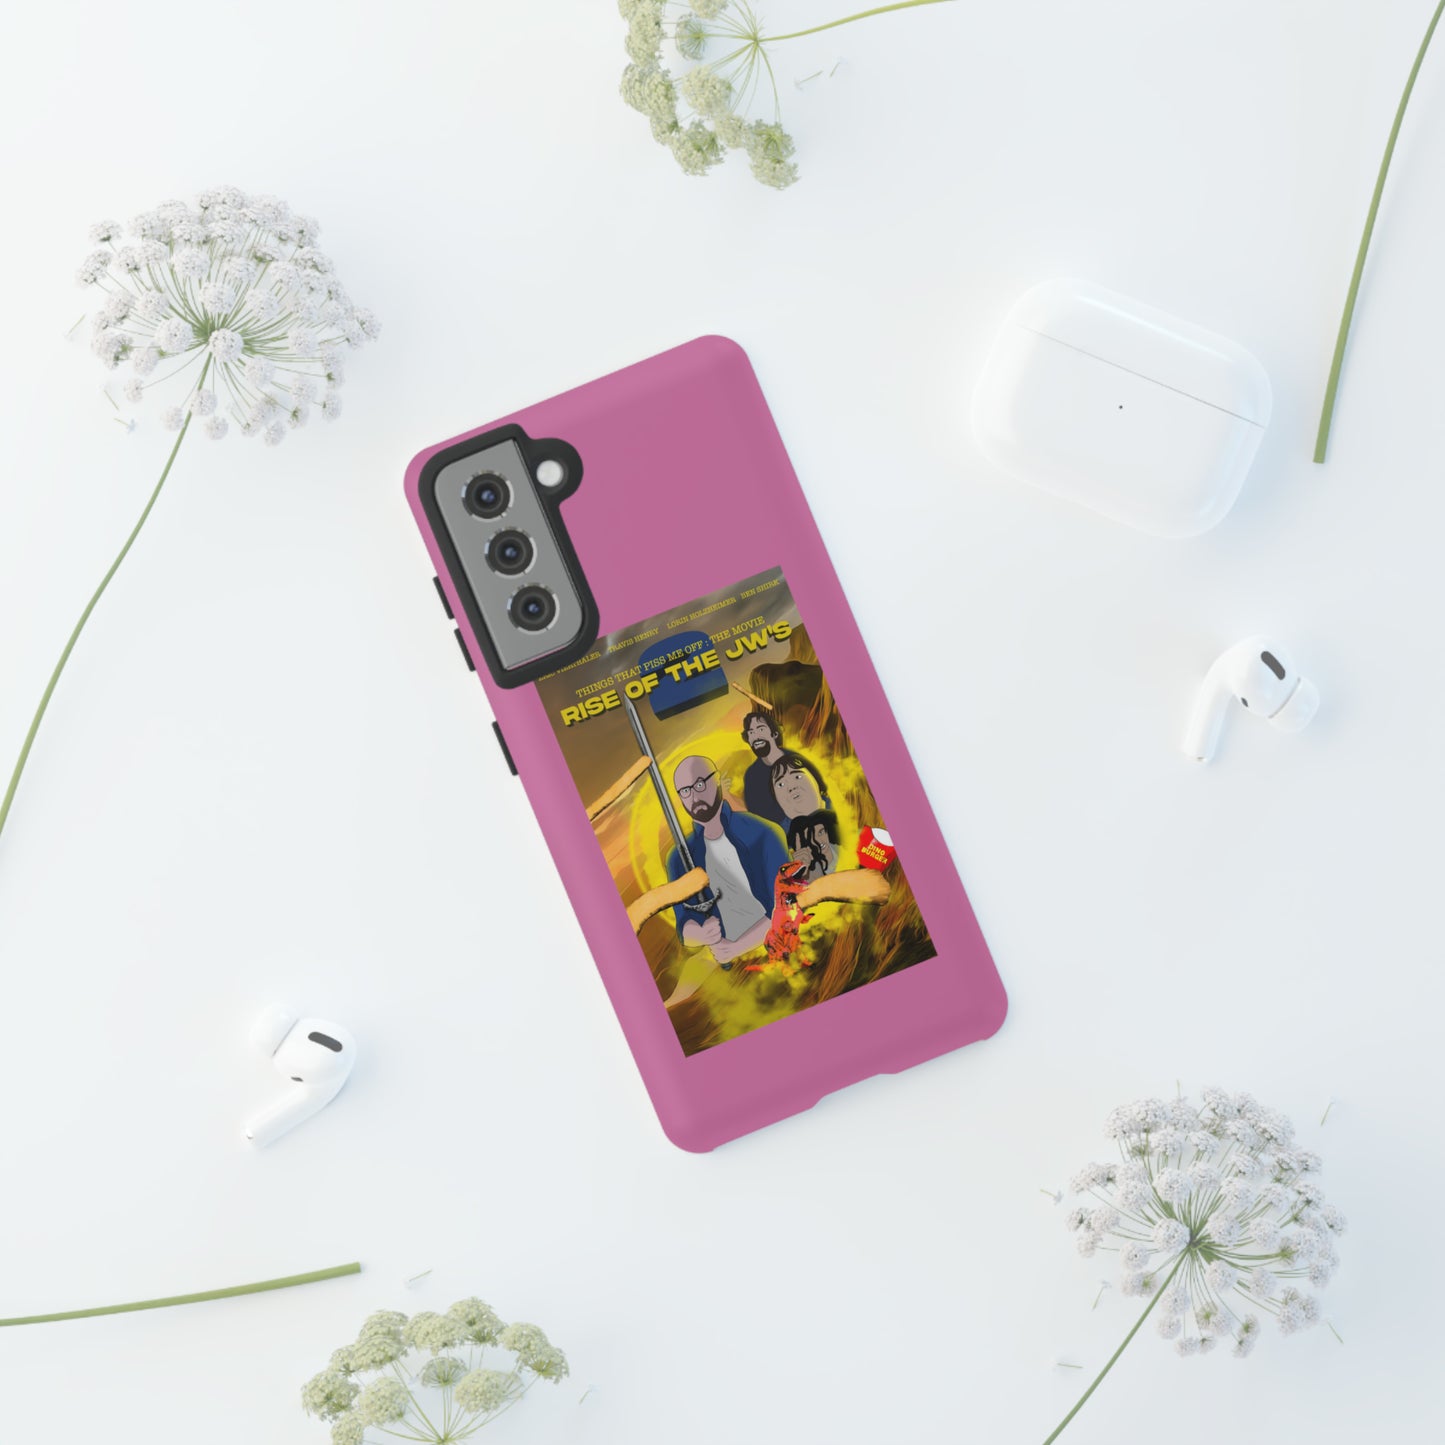 Rise Of The JW's Tough Phone Case (light pink)